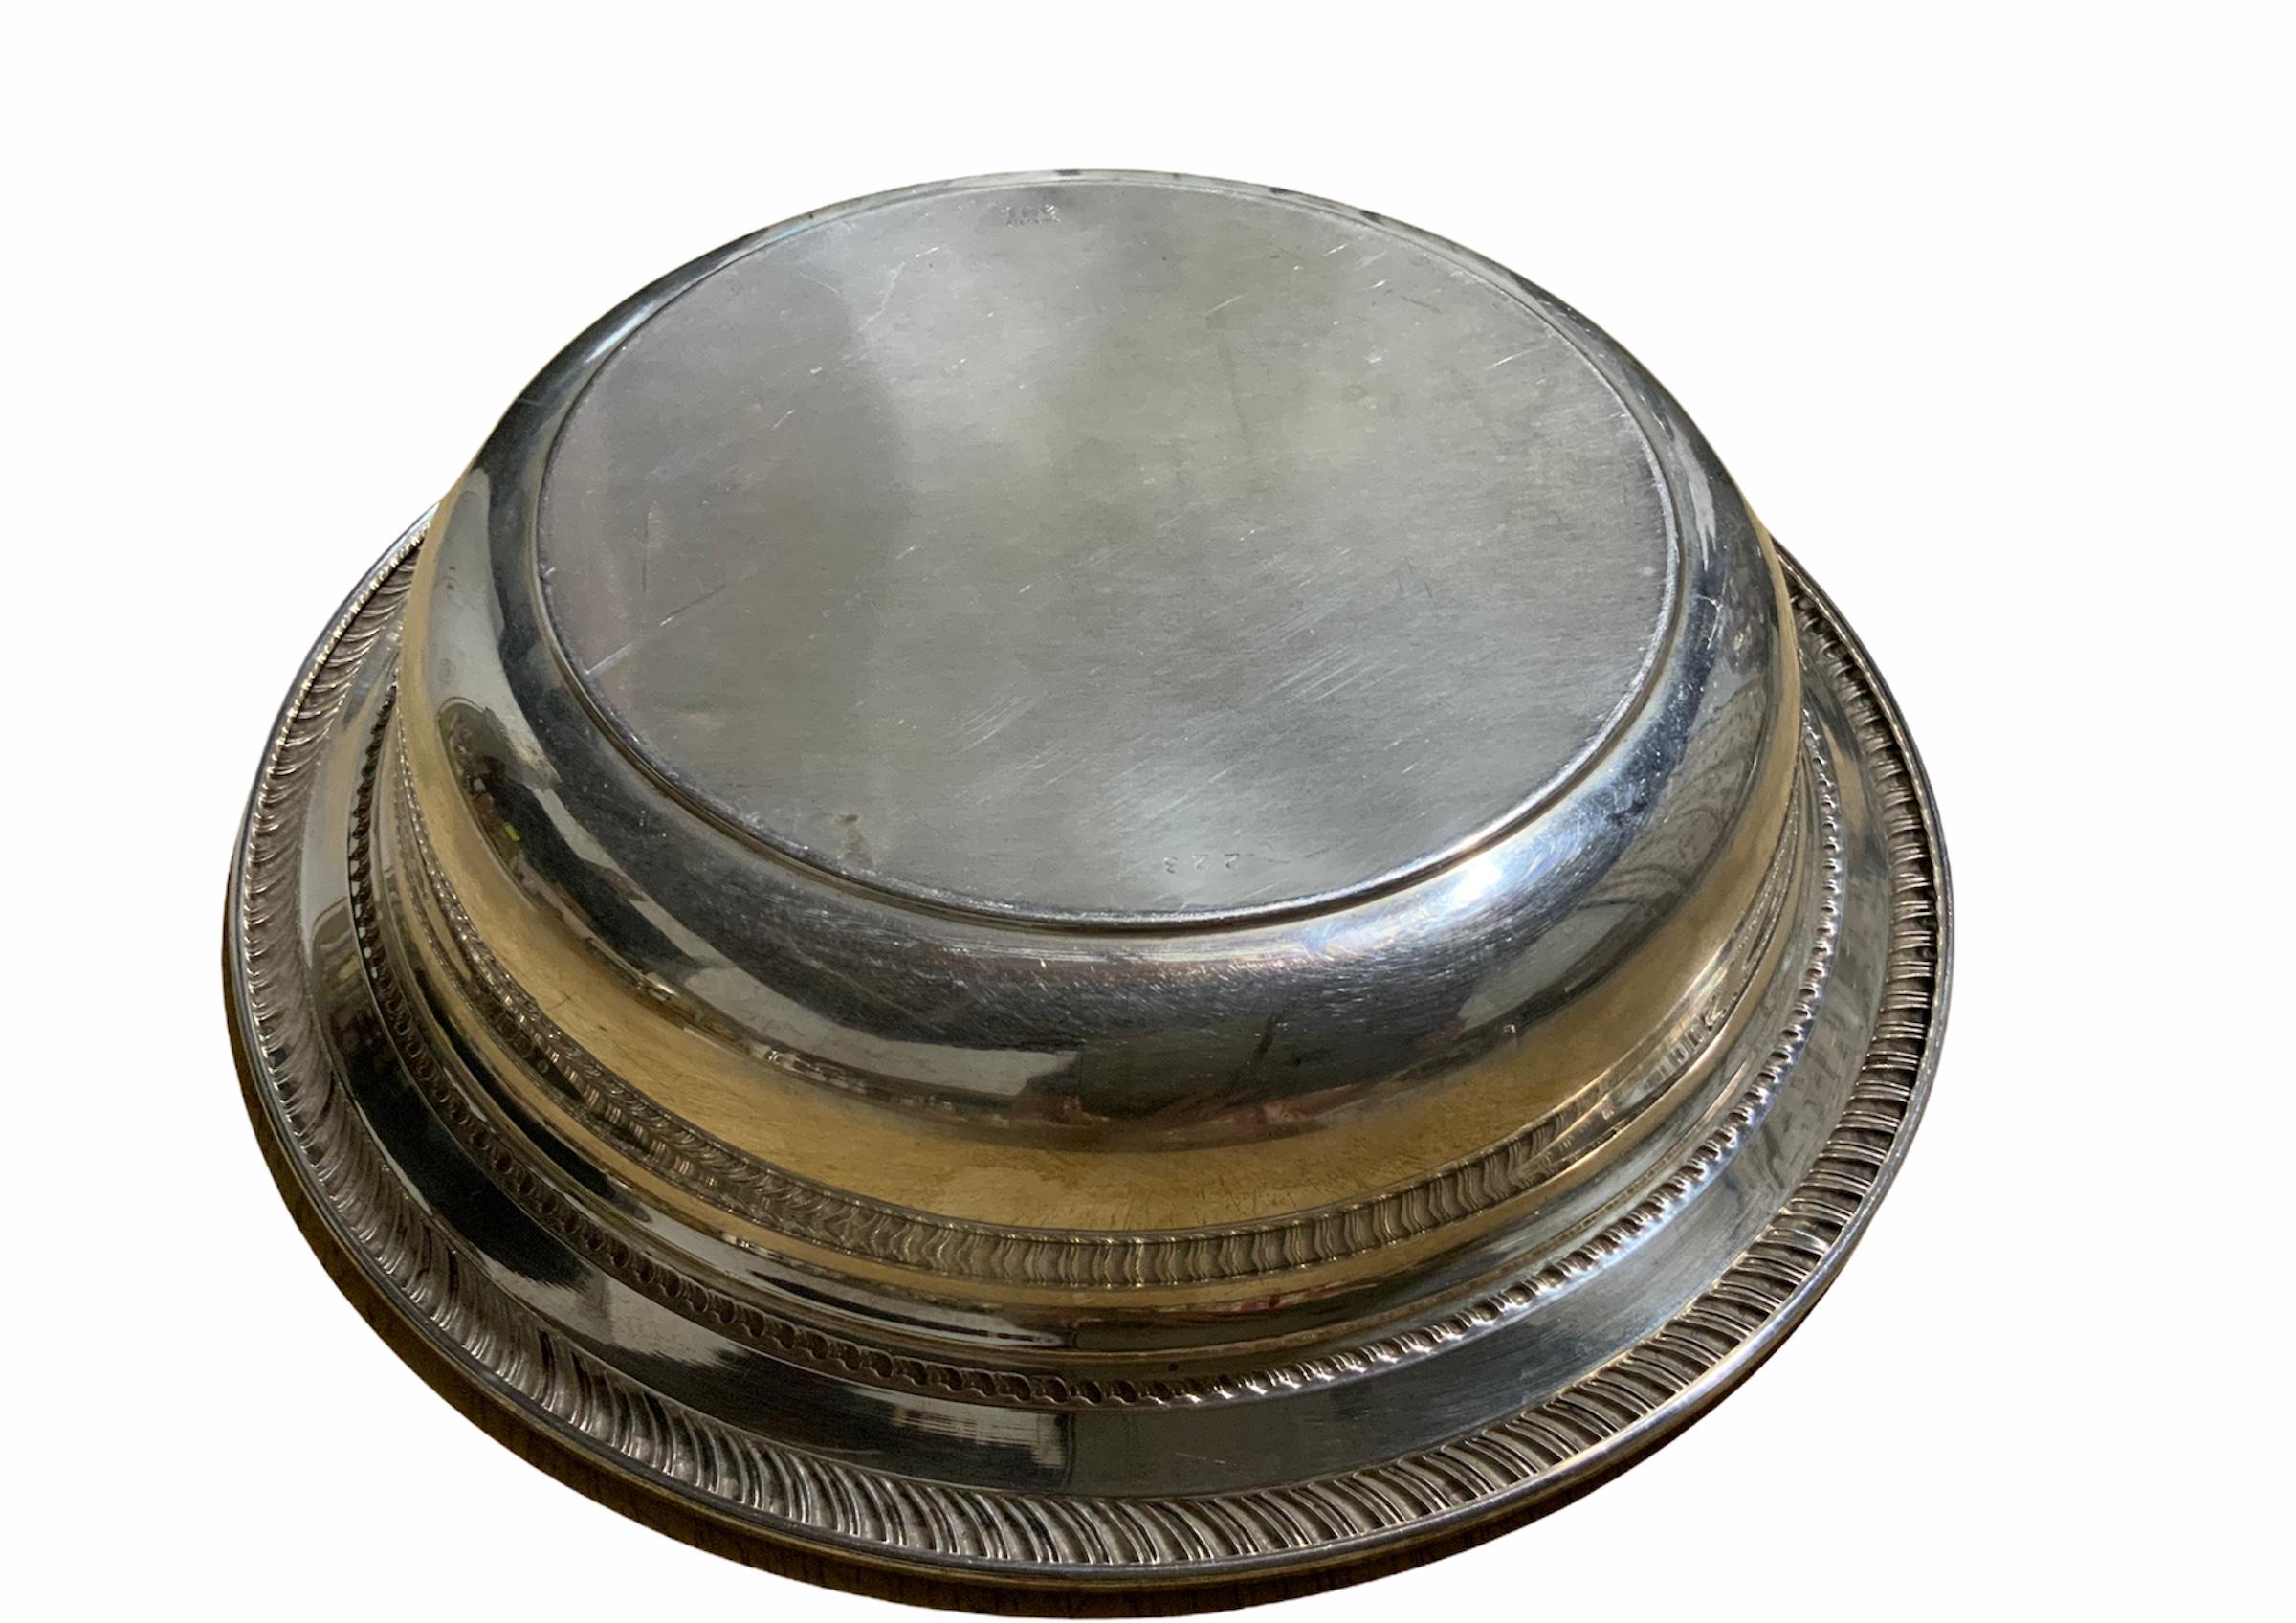 This is a Fred Hirsch & Co. Sterling dish bowl. It is adorned in the top with a gadrooning border, followed by a flat band and then, kind of a rope design. Below the base is the Fred Hirsch & Co. hallmark.